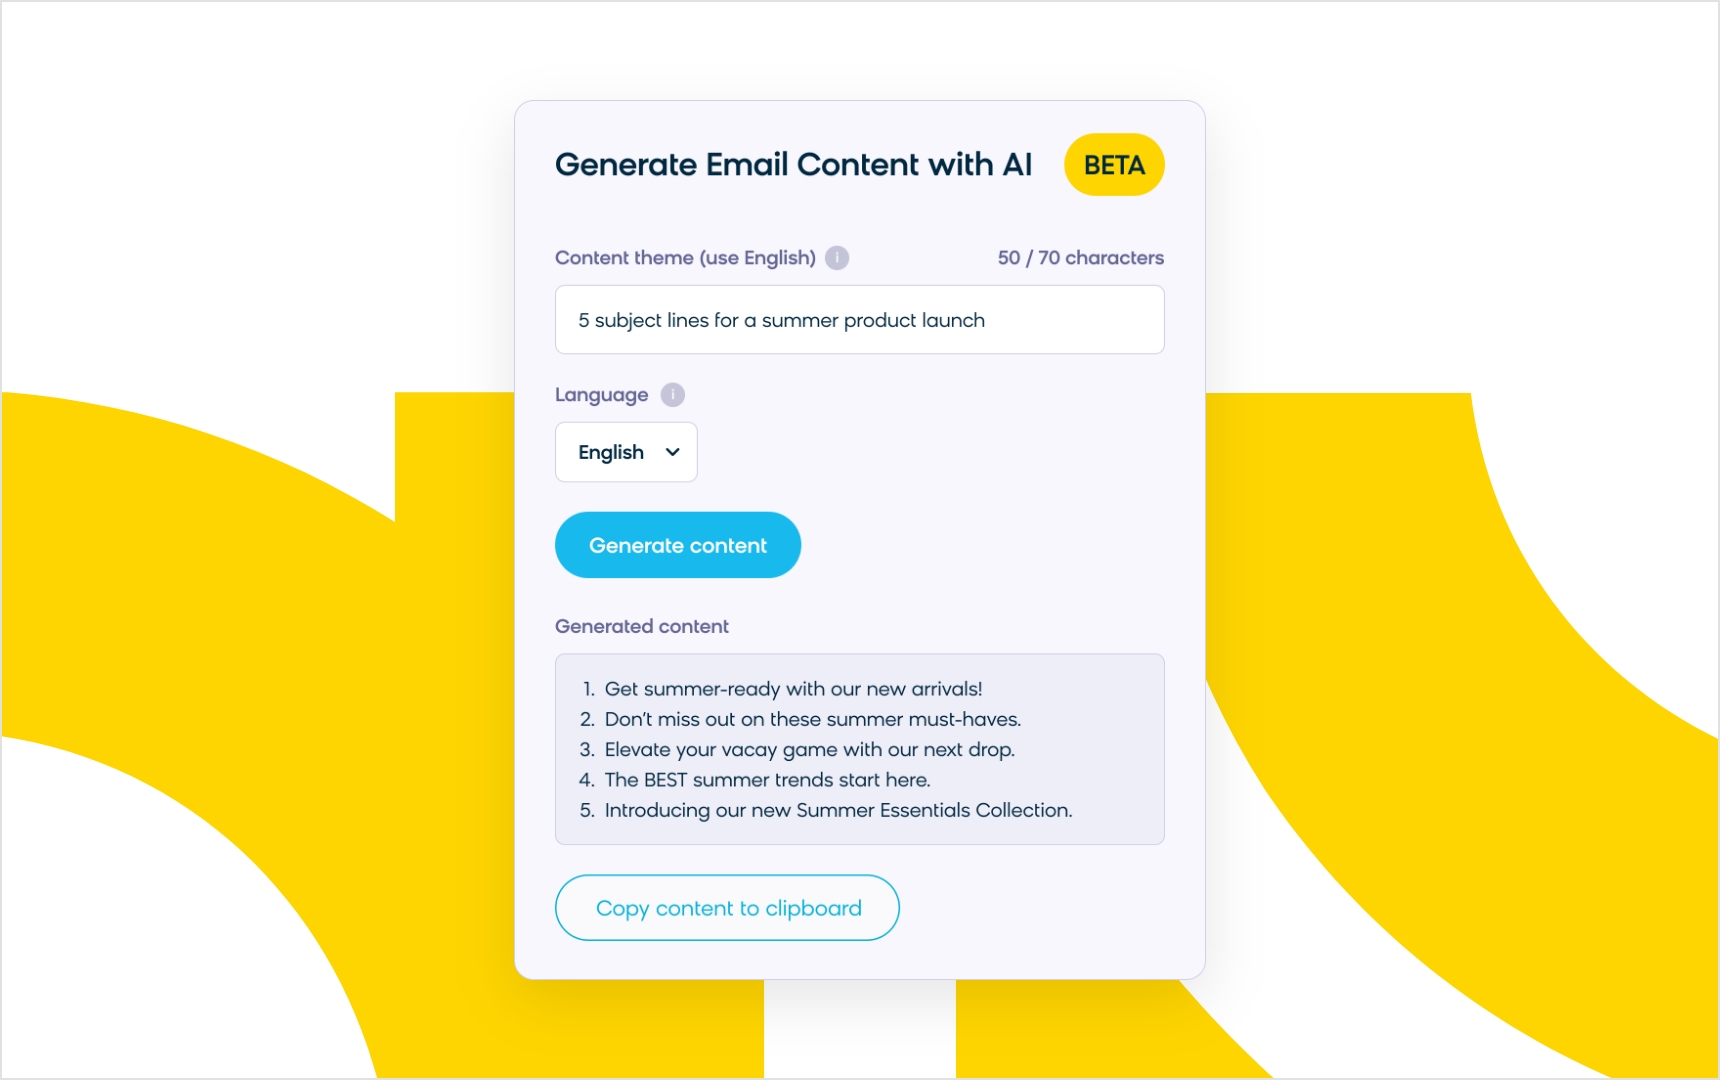 Using generative AI as part of an email marketing strategy to create email subject lines